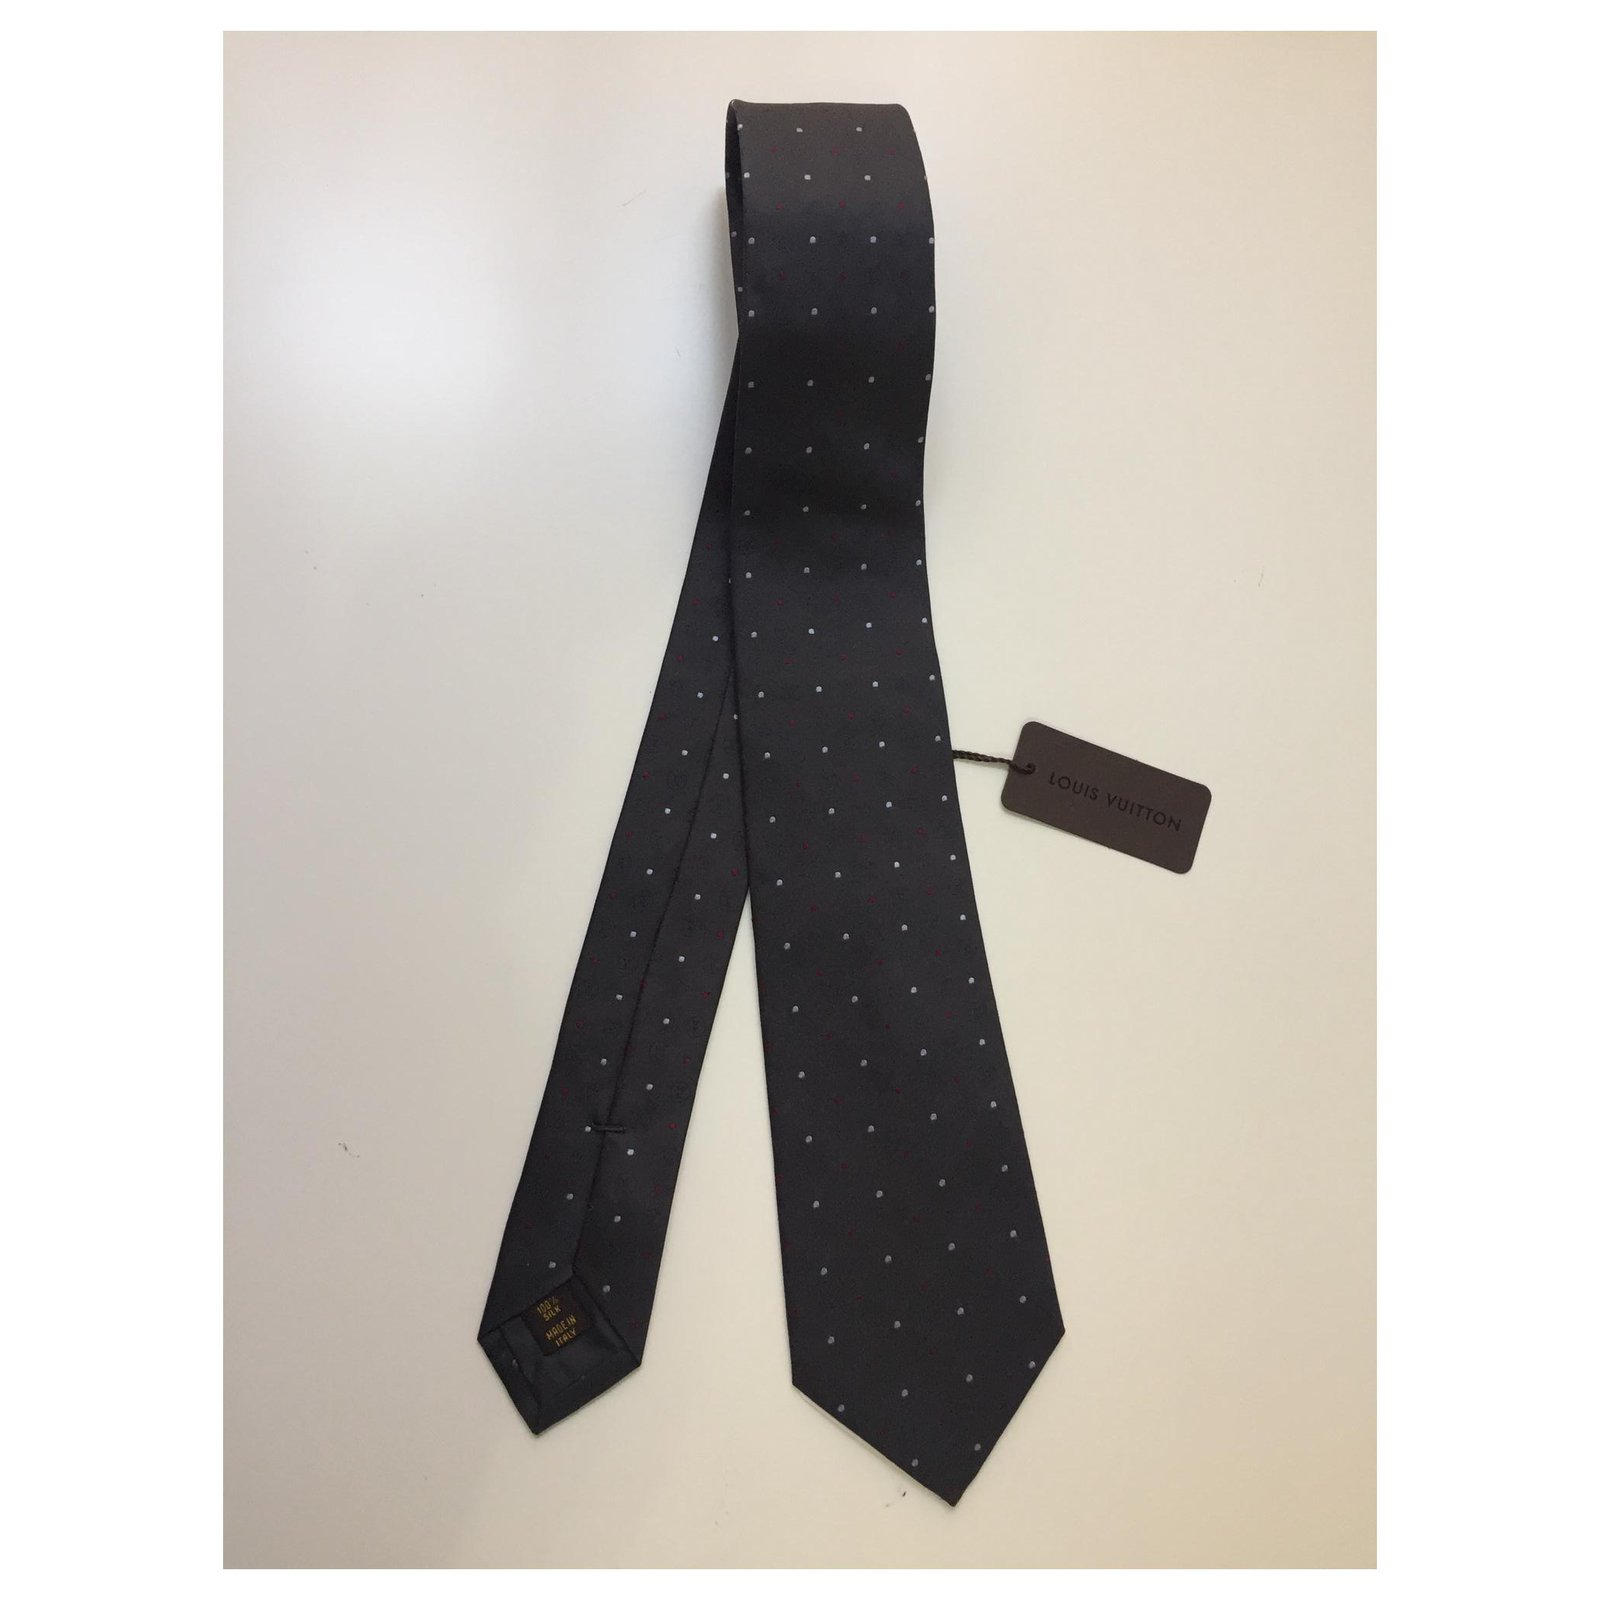 Buy designer Ties by louis-vuitton at The Luxury Closet.